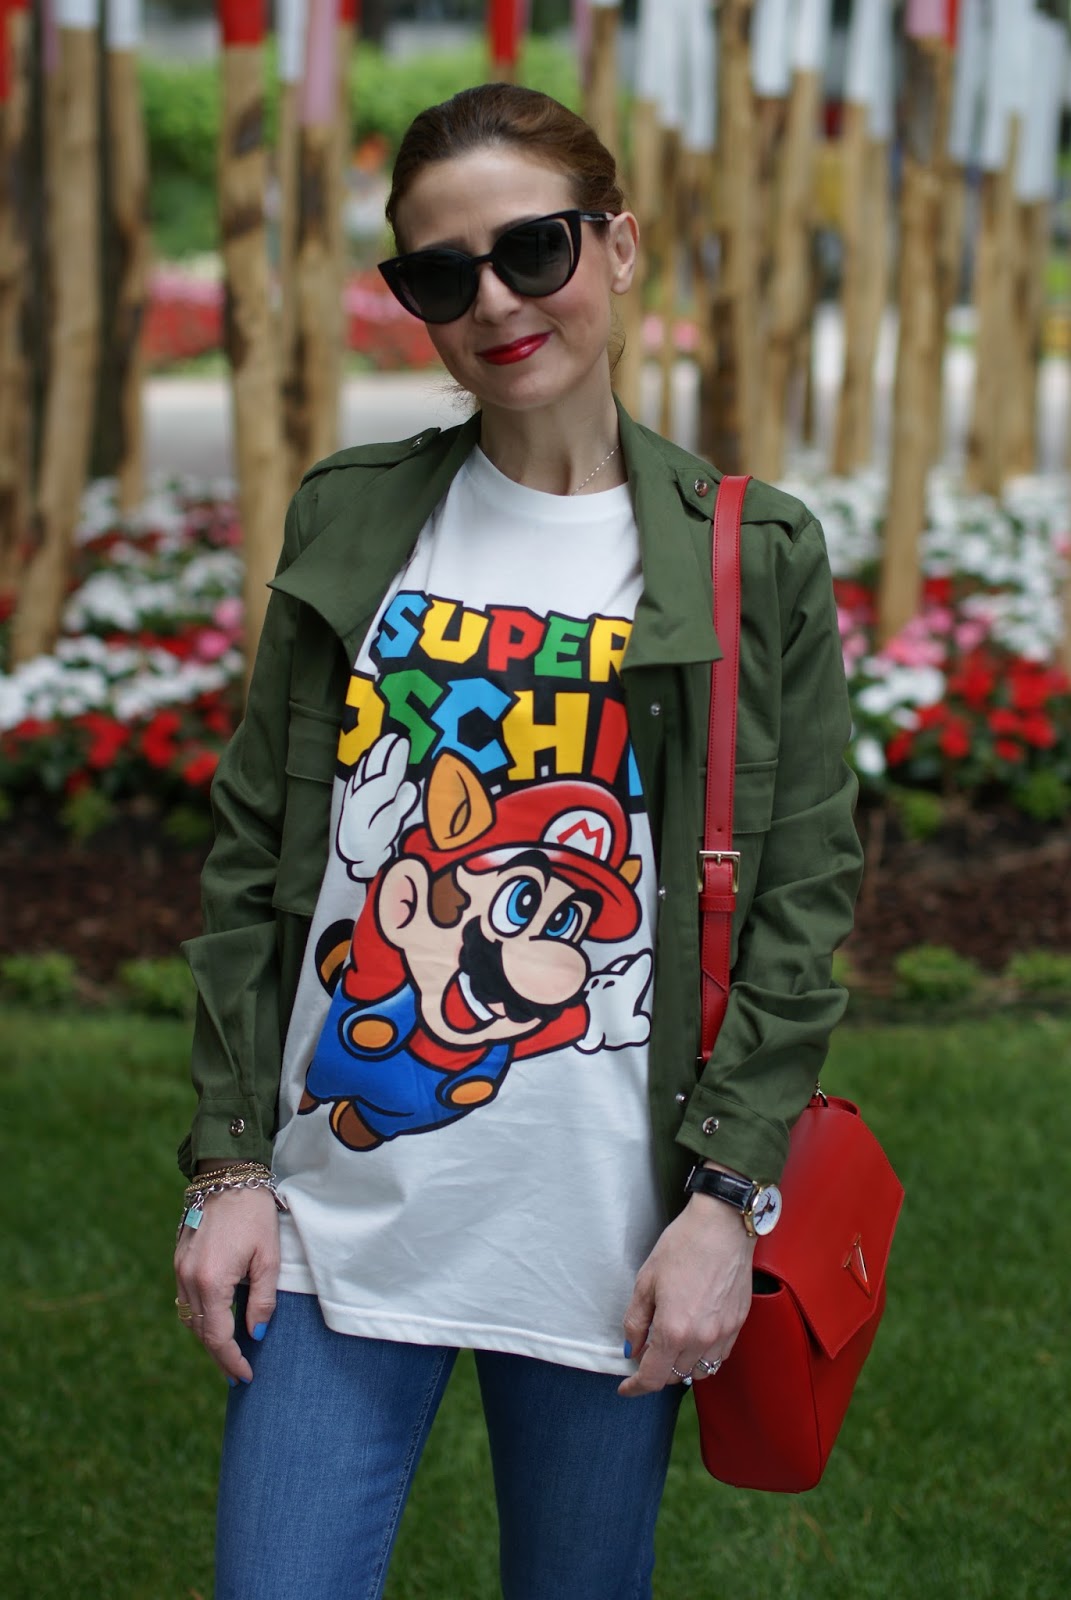 Moschino Super Moschino t-shirt with Tanooki Mario from Super Mario bros, Lookbook Store army green jacket on Fashion and Cookies fashion blog, fashion blogger style